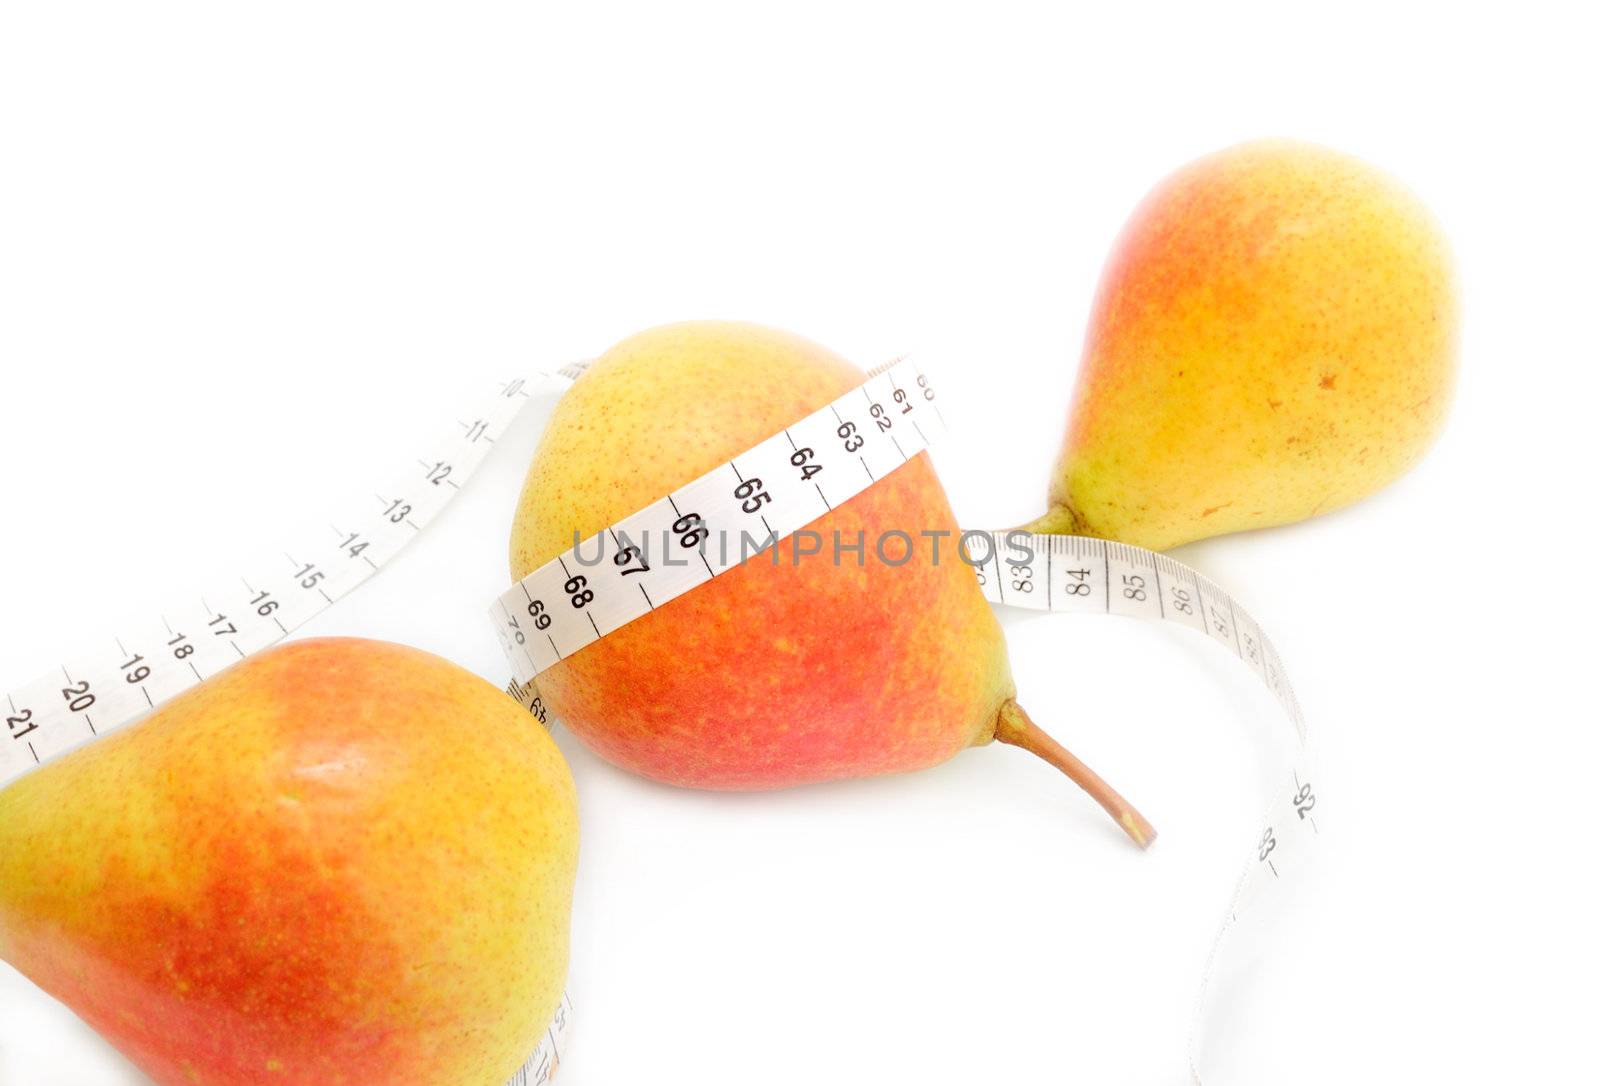 concept of healthy diet - three fresh pears and measuring tape